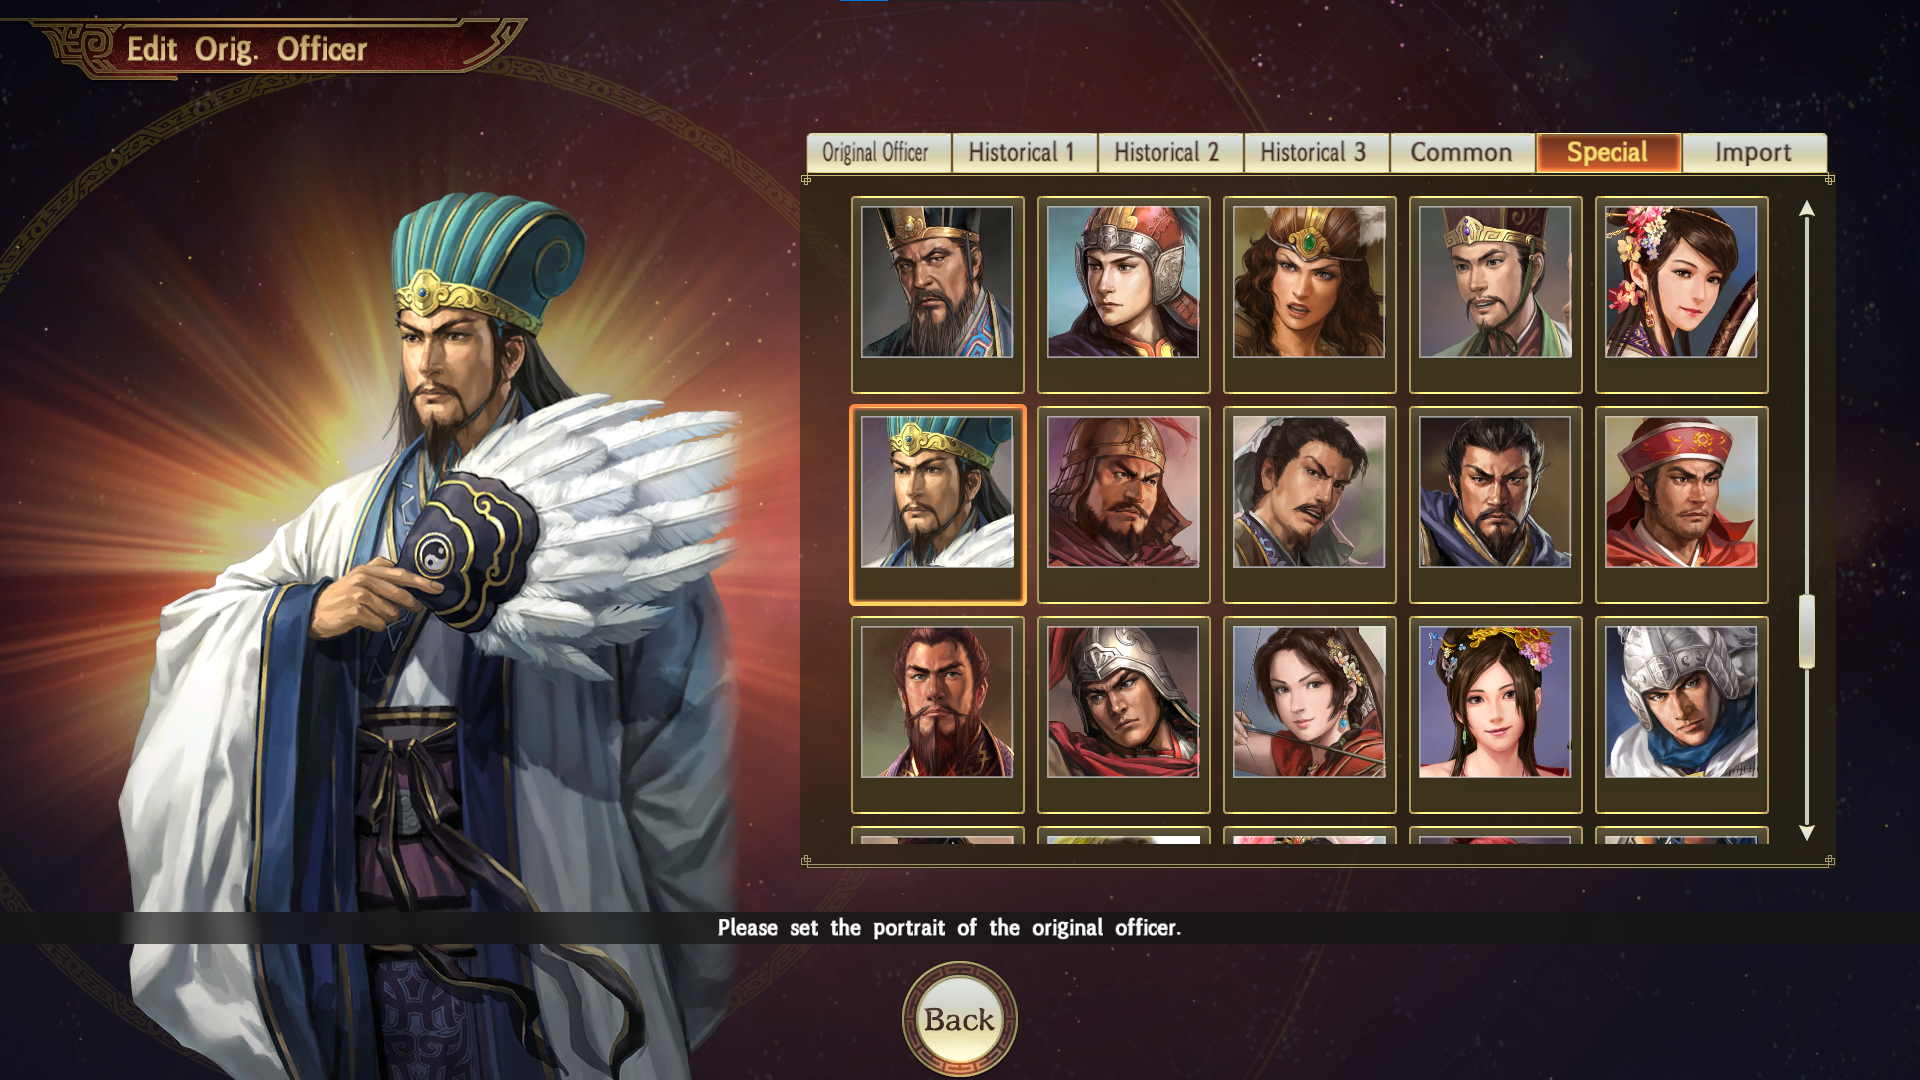 Heroes of the Three Kingdoms 2021 Wallpapers